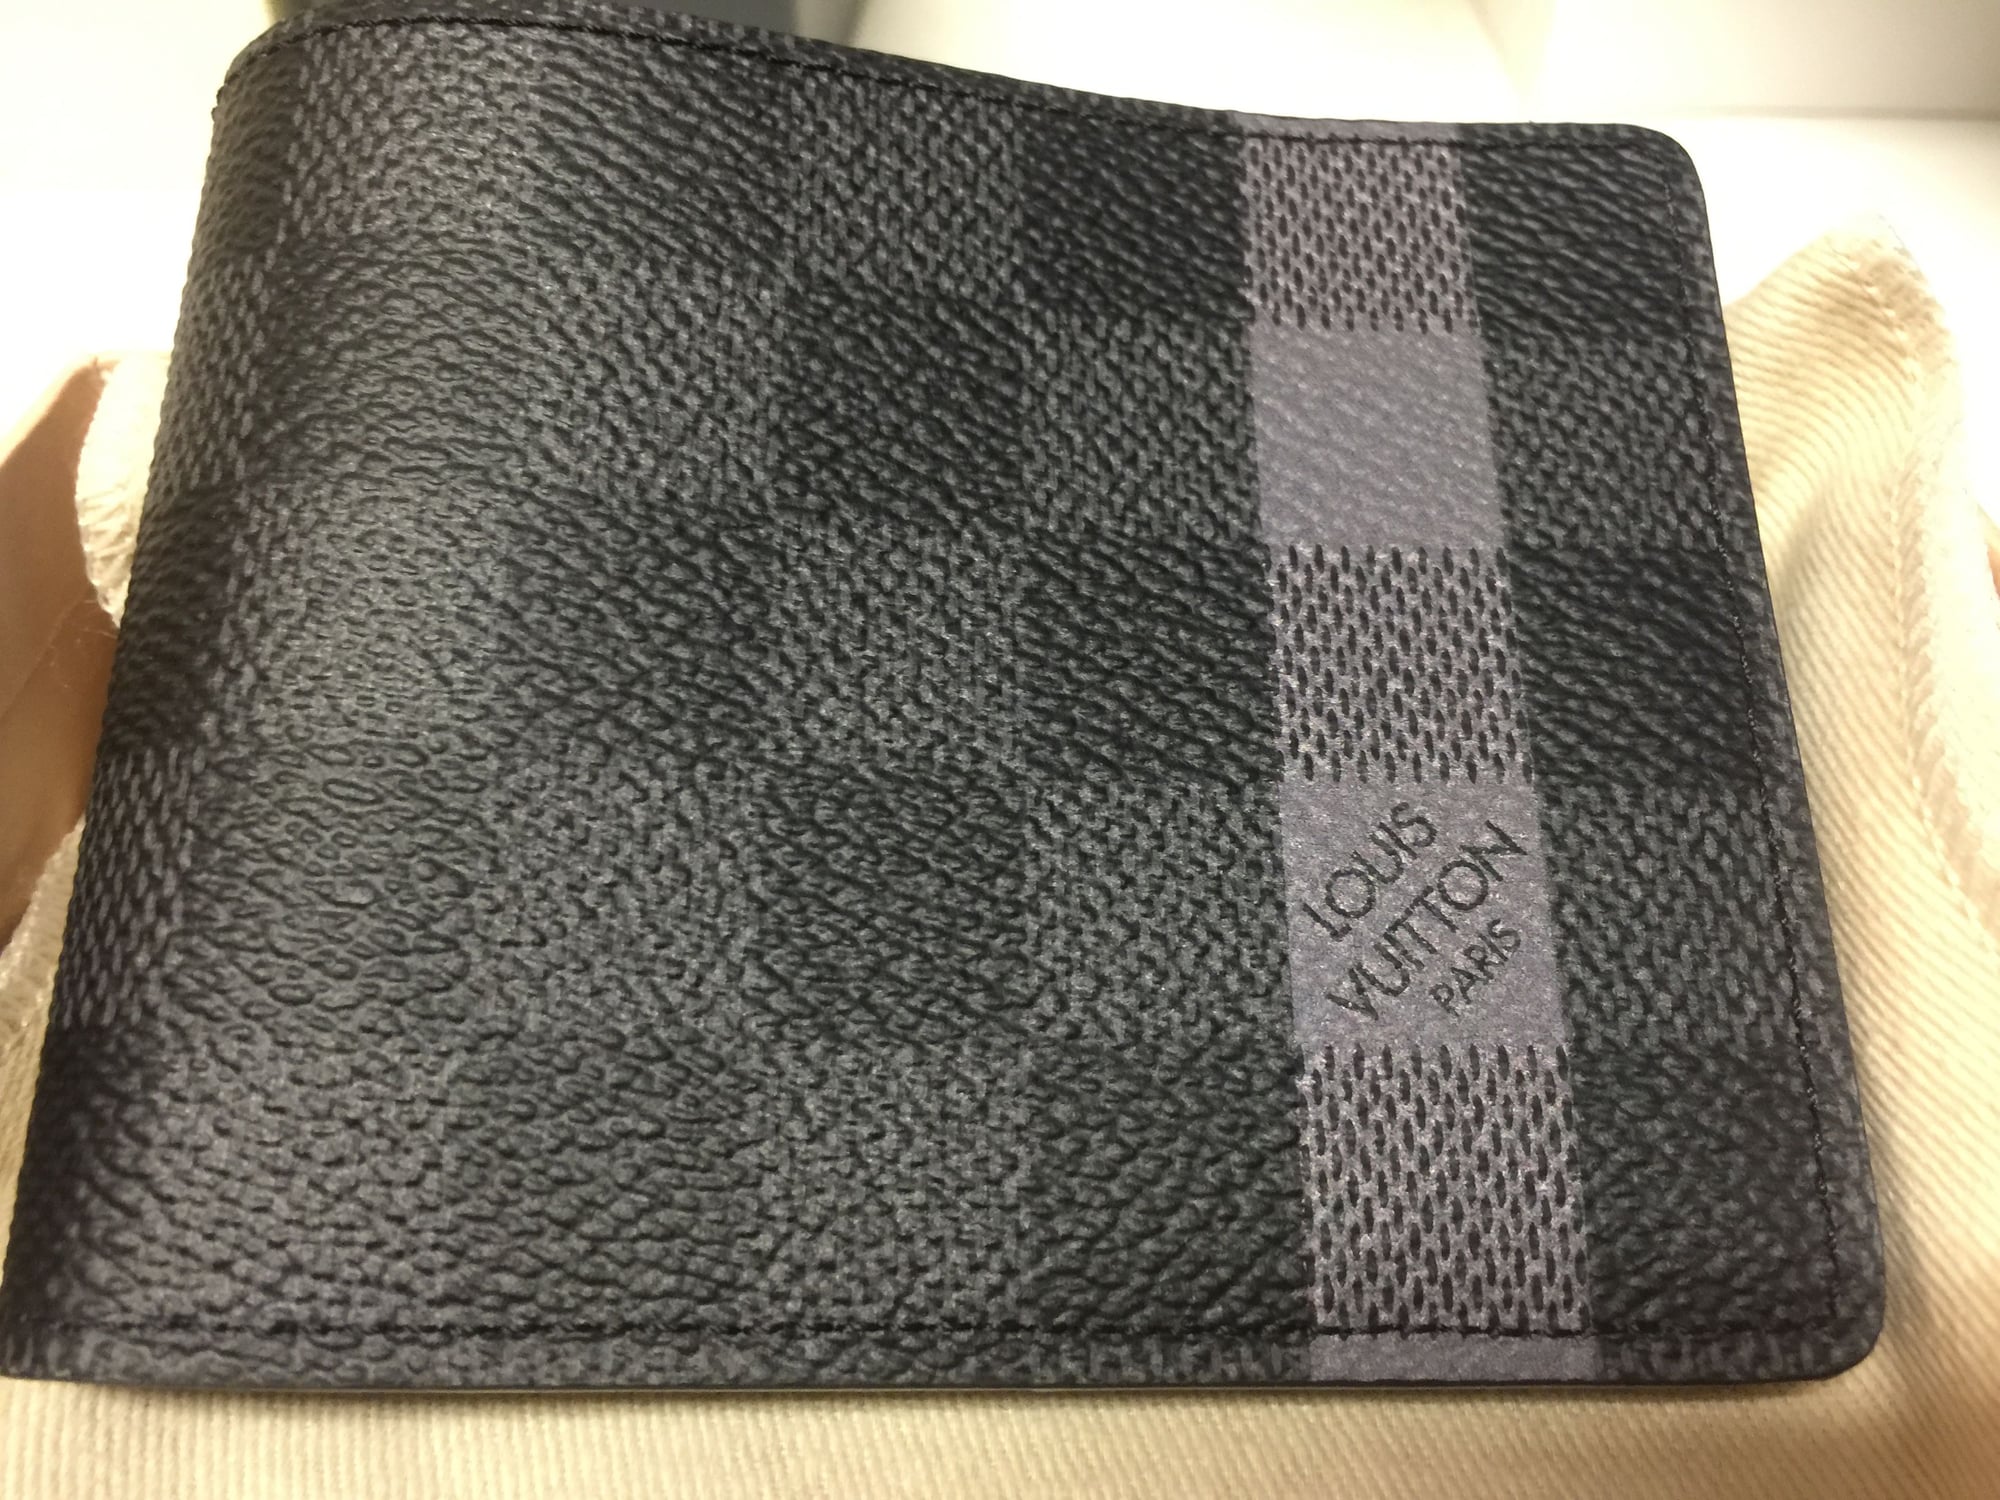 brand new with tags Louis Vuitton Damier graphite slender wallet+